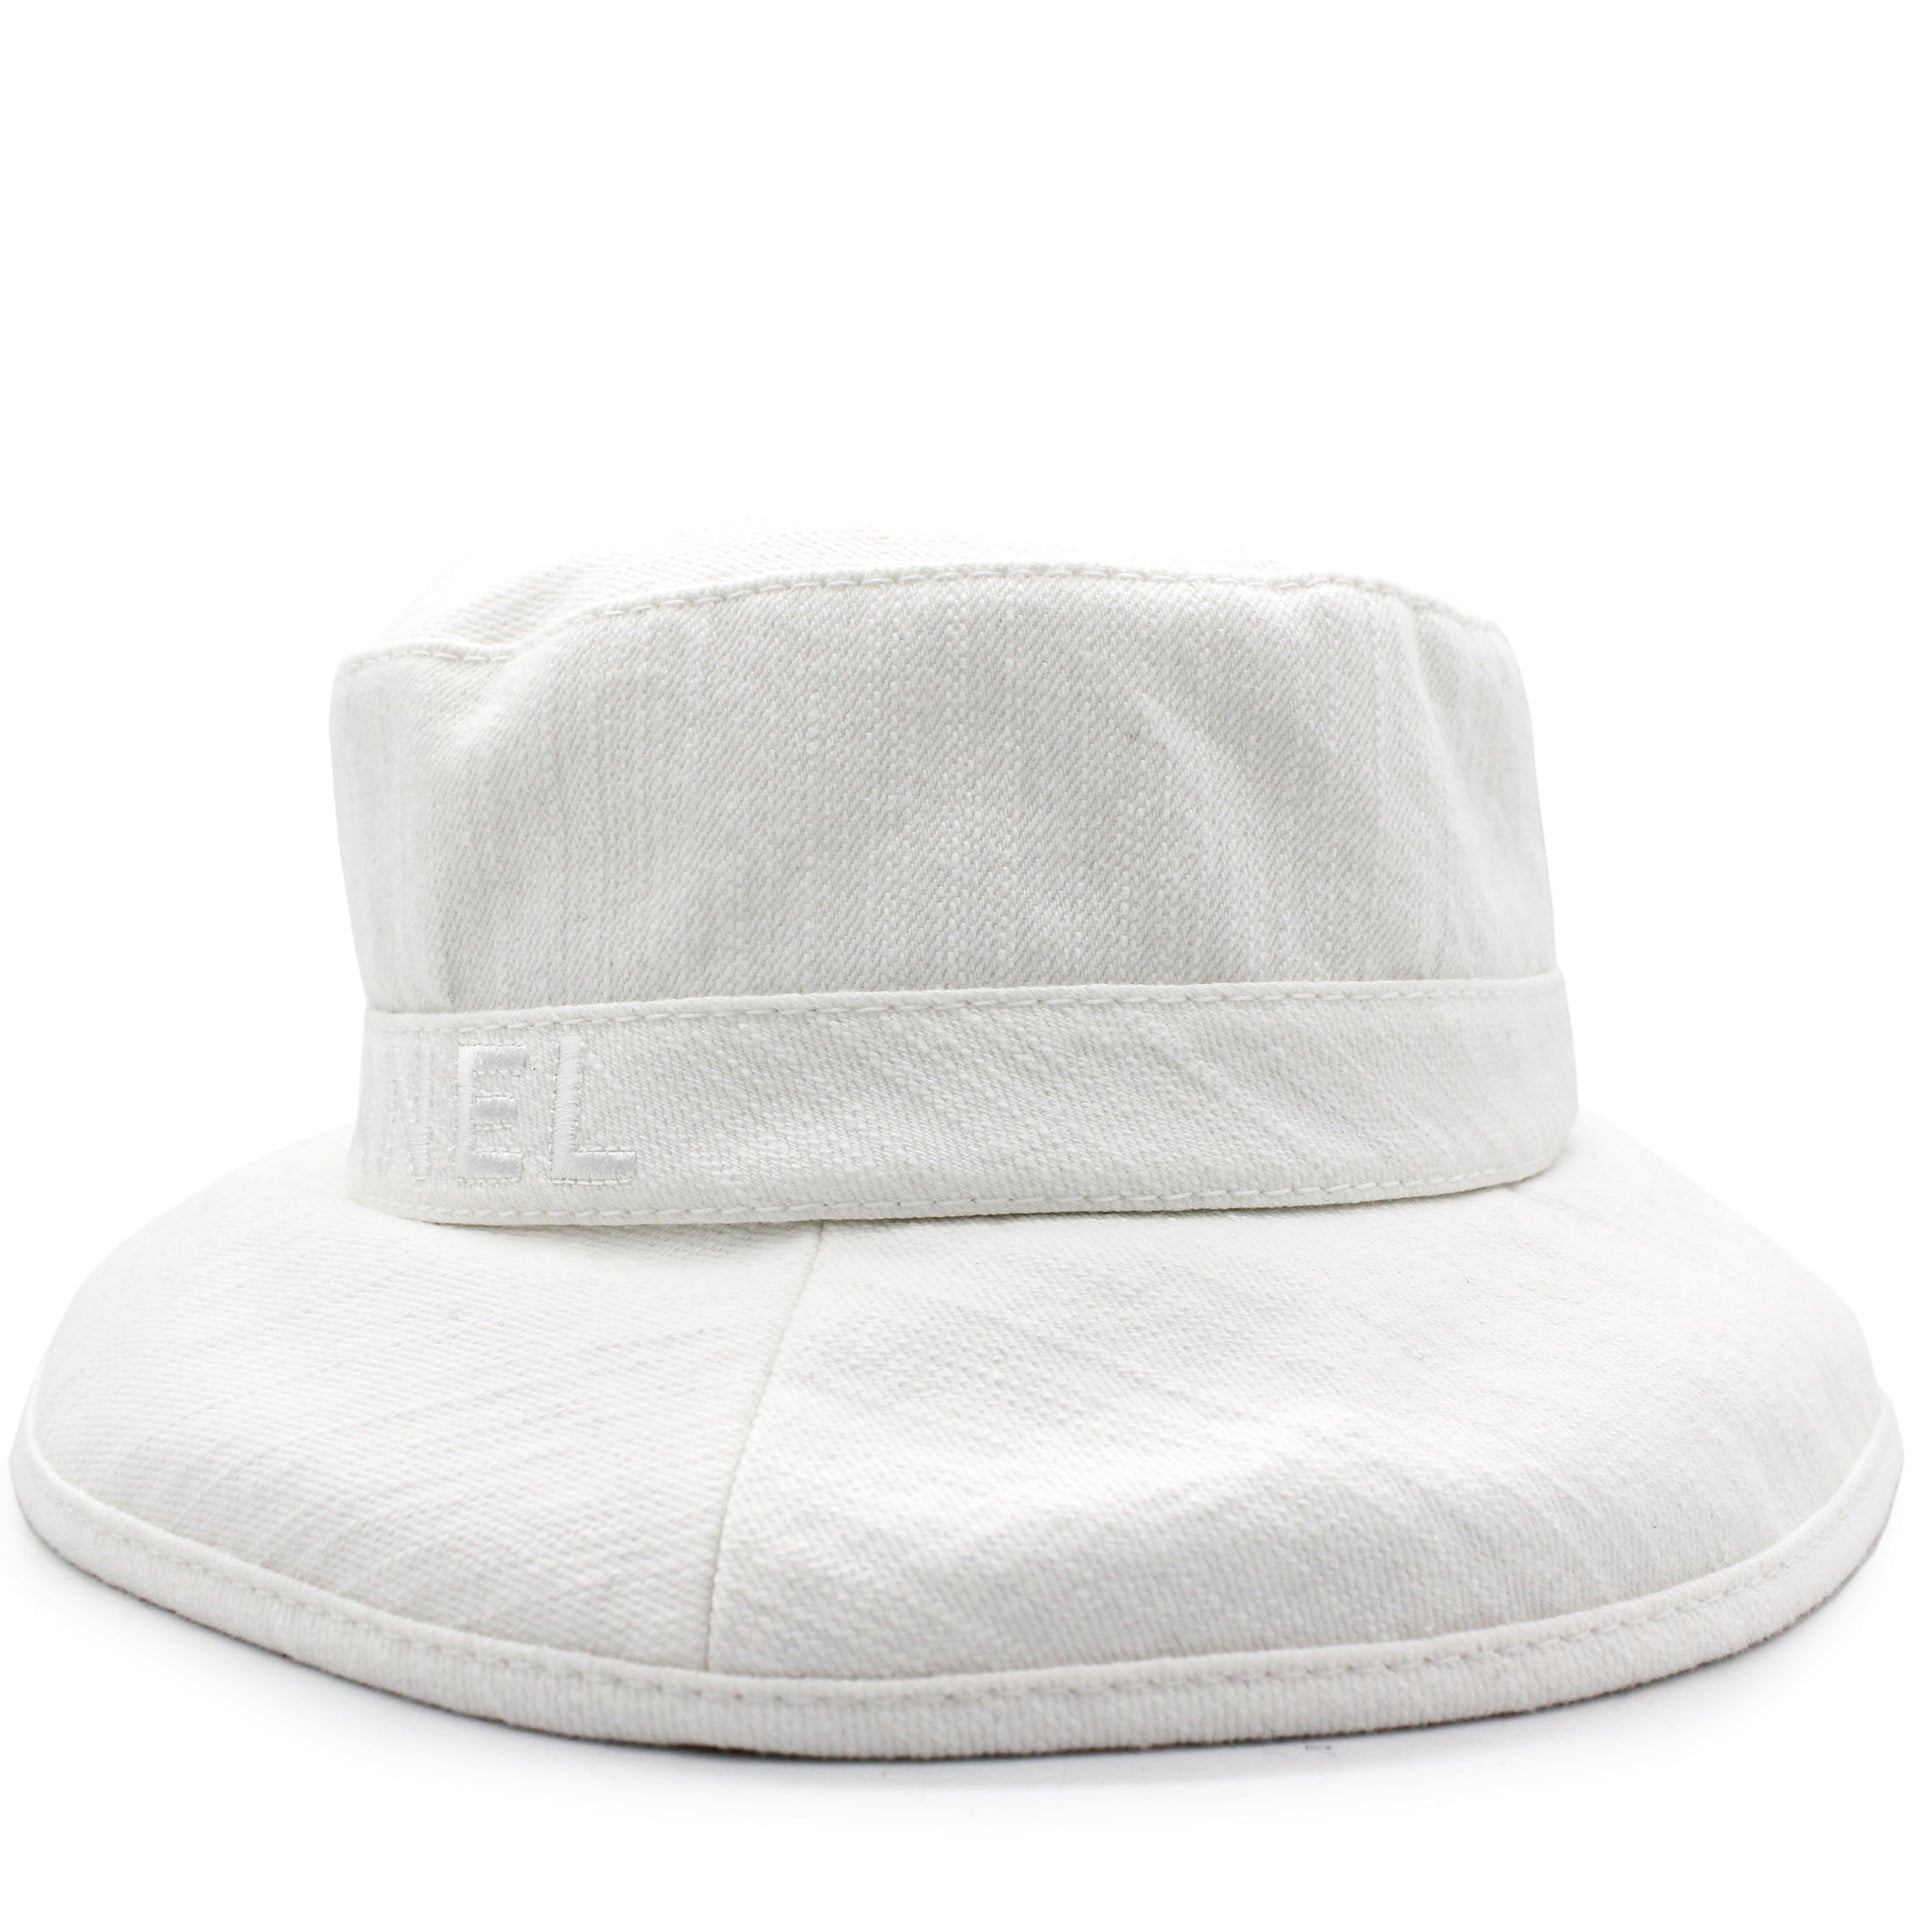 Chanel - Authenticated Hat - Cotton White Plain for Women, Never Worn